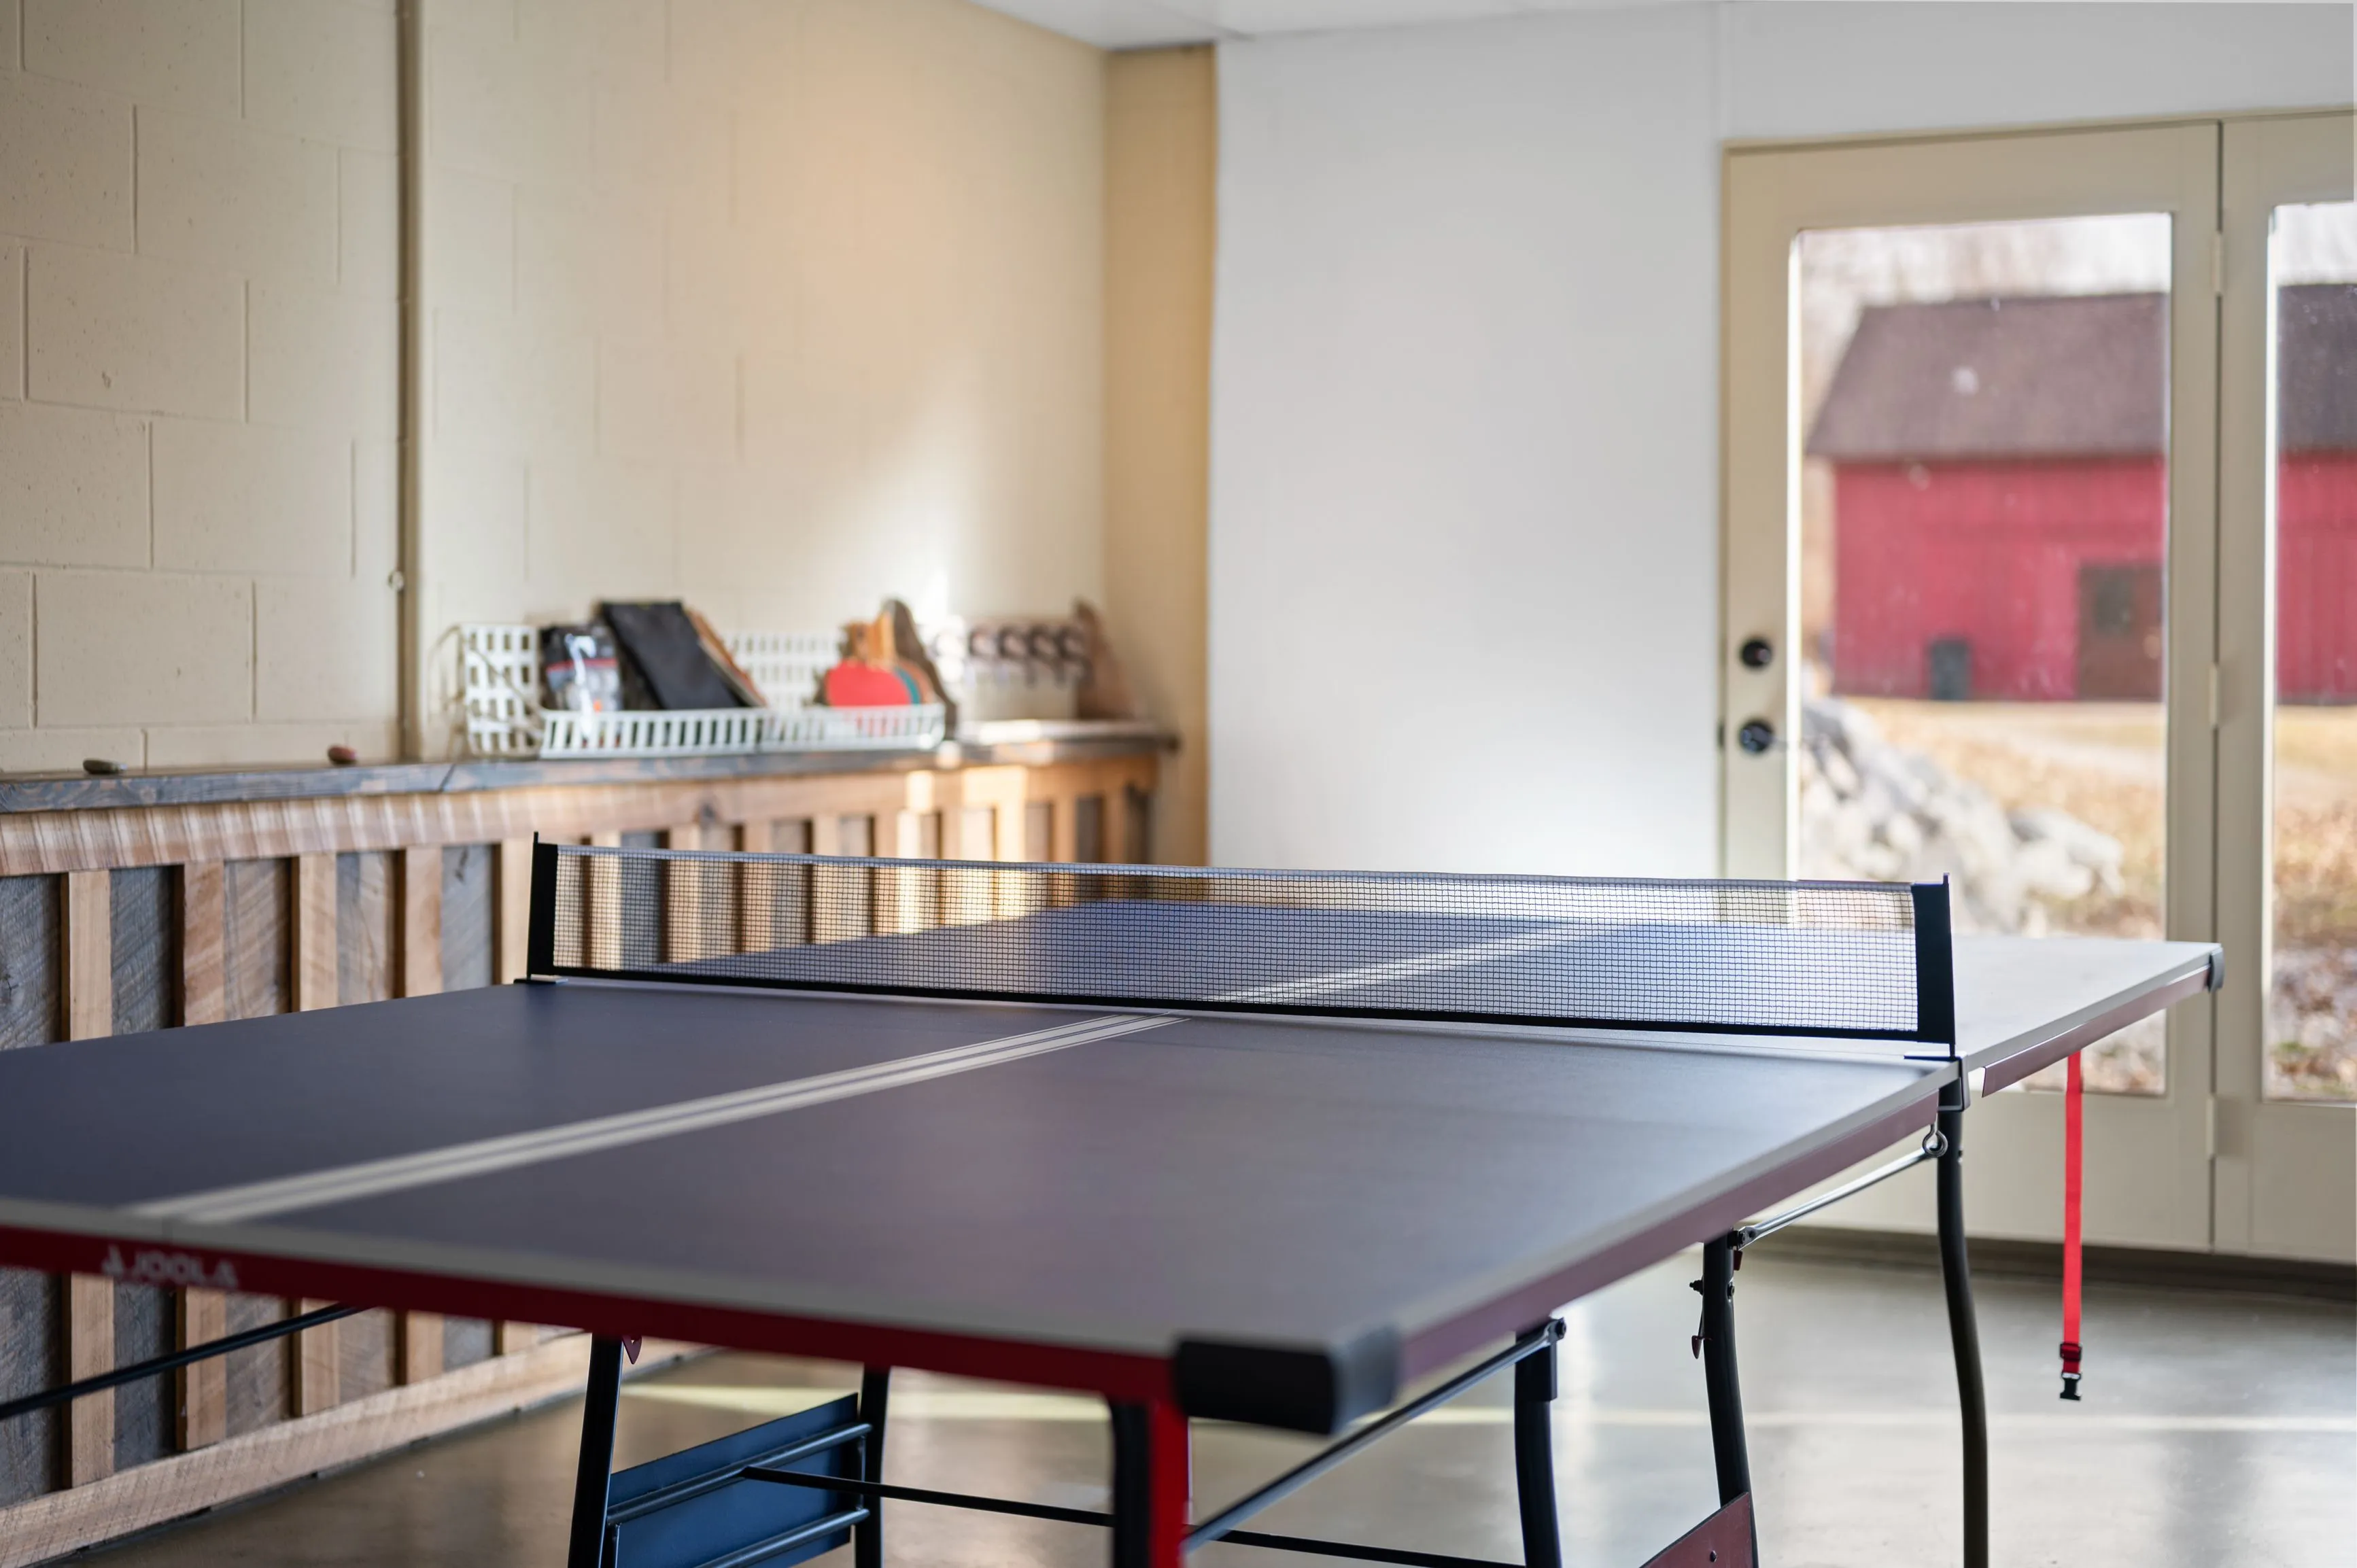 A table tennis table in a spacious room with concrete walls, a workbench with tools, and view of a red barn outside through the door.